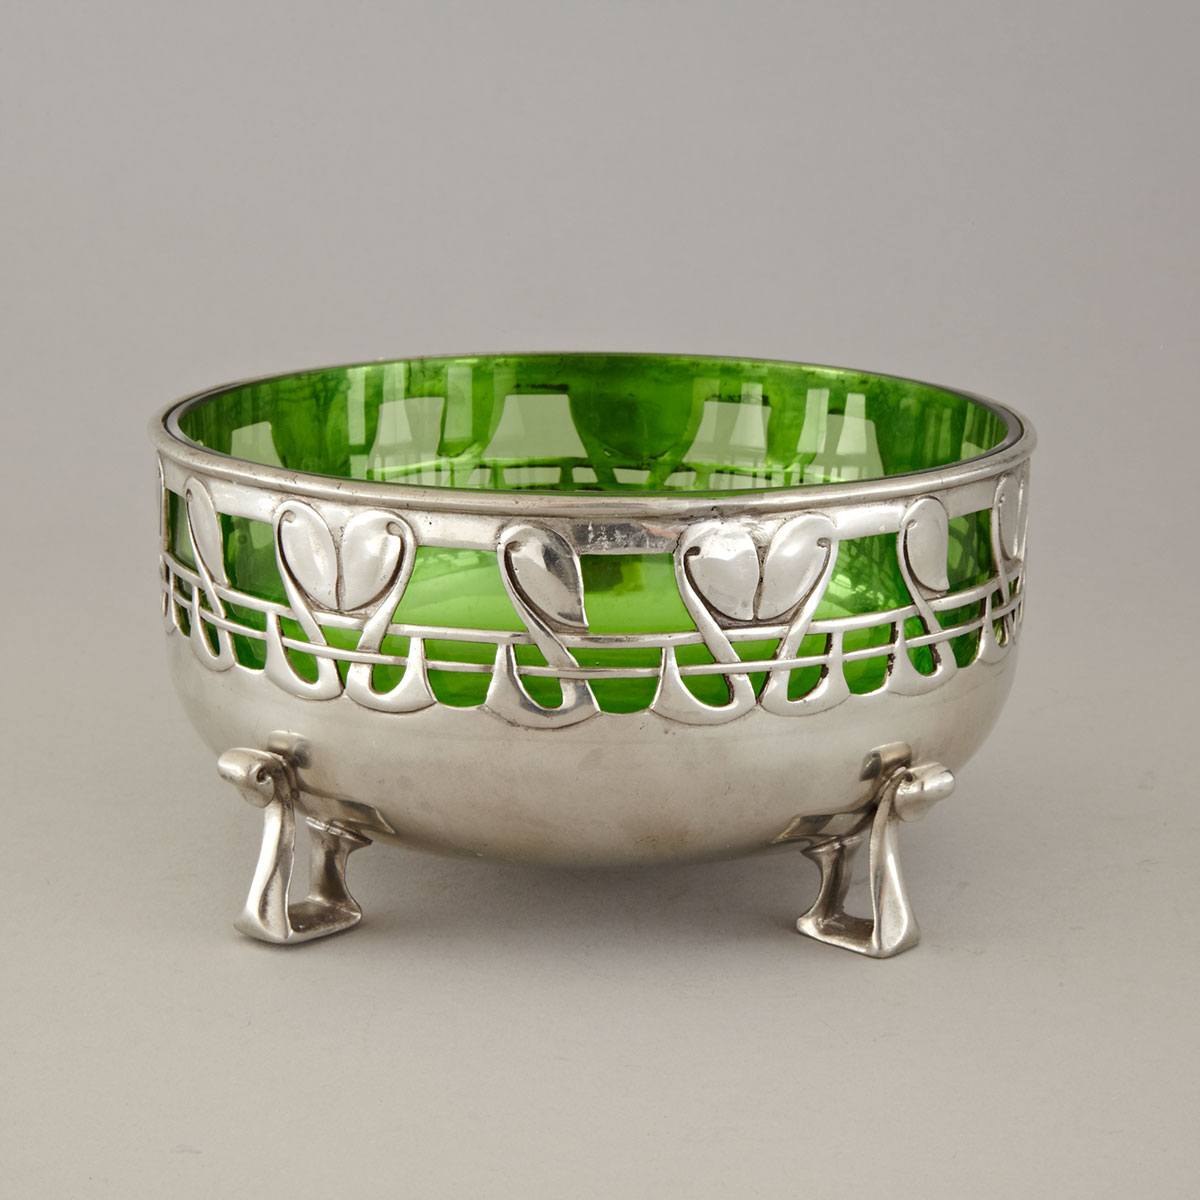 Archibald Knox for Liberty & Co., Pierced ‘Tudric’ Pewter Footed Bowl, c.1900